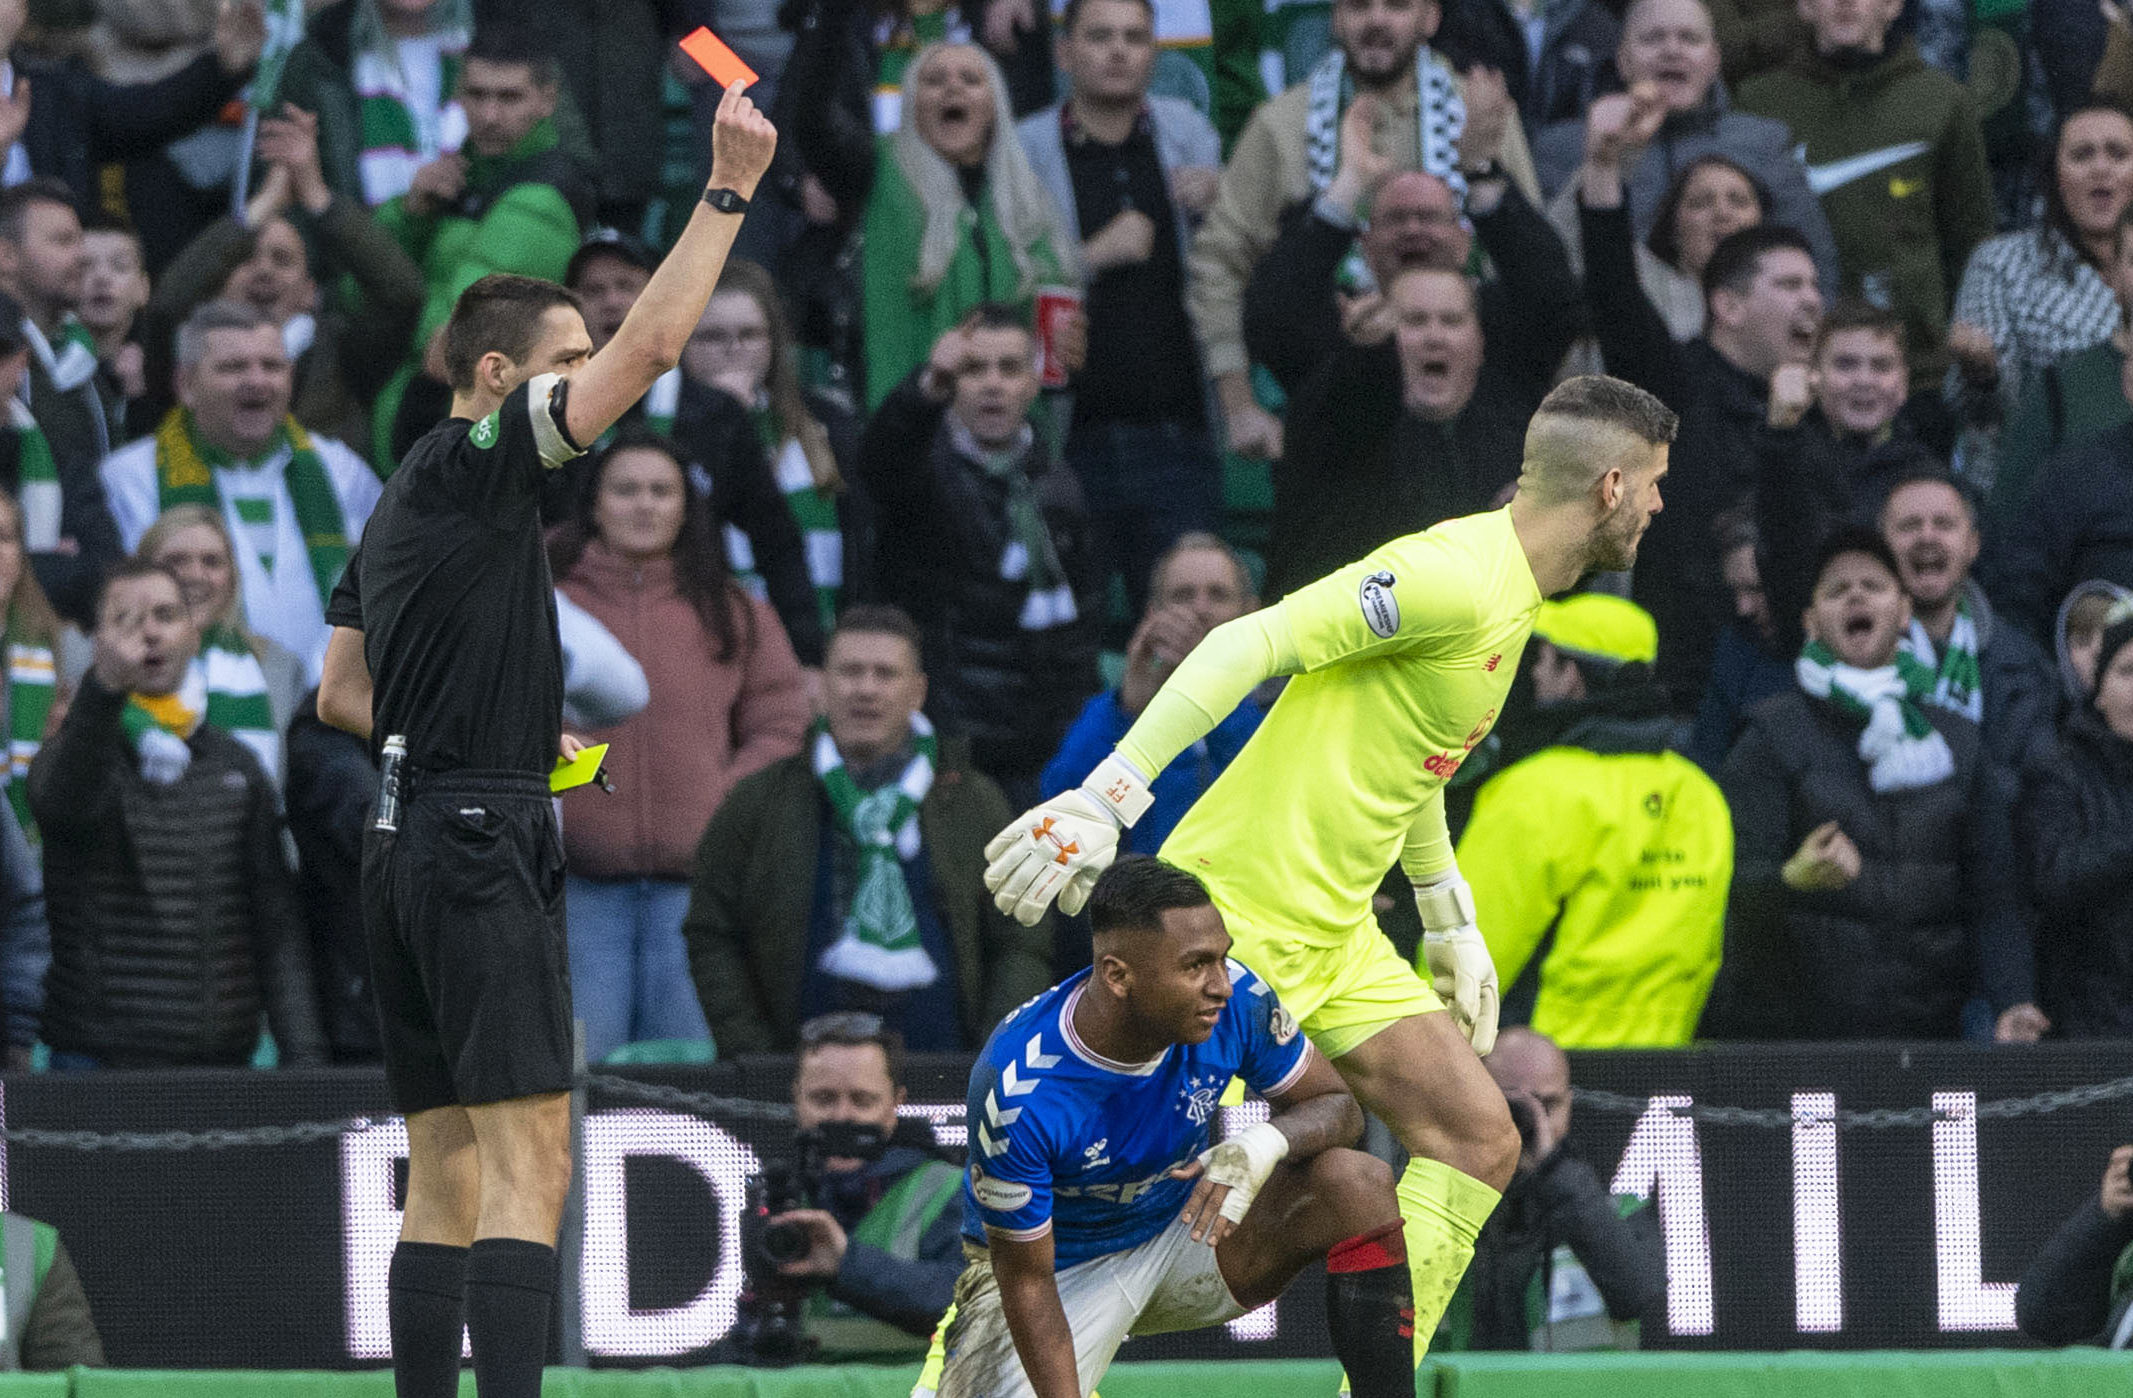 There can be no more red cards for Alfredo Morelos if Rangers are to maintain their title challenge